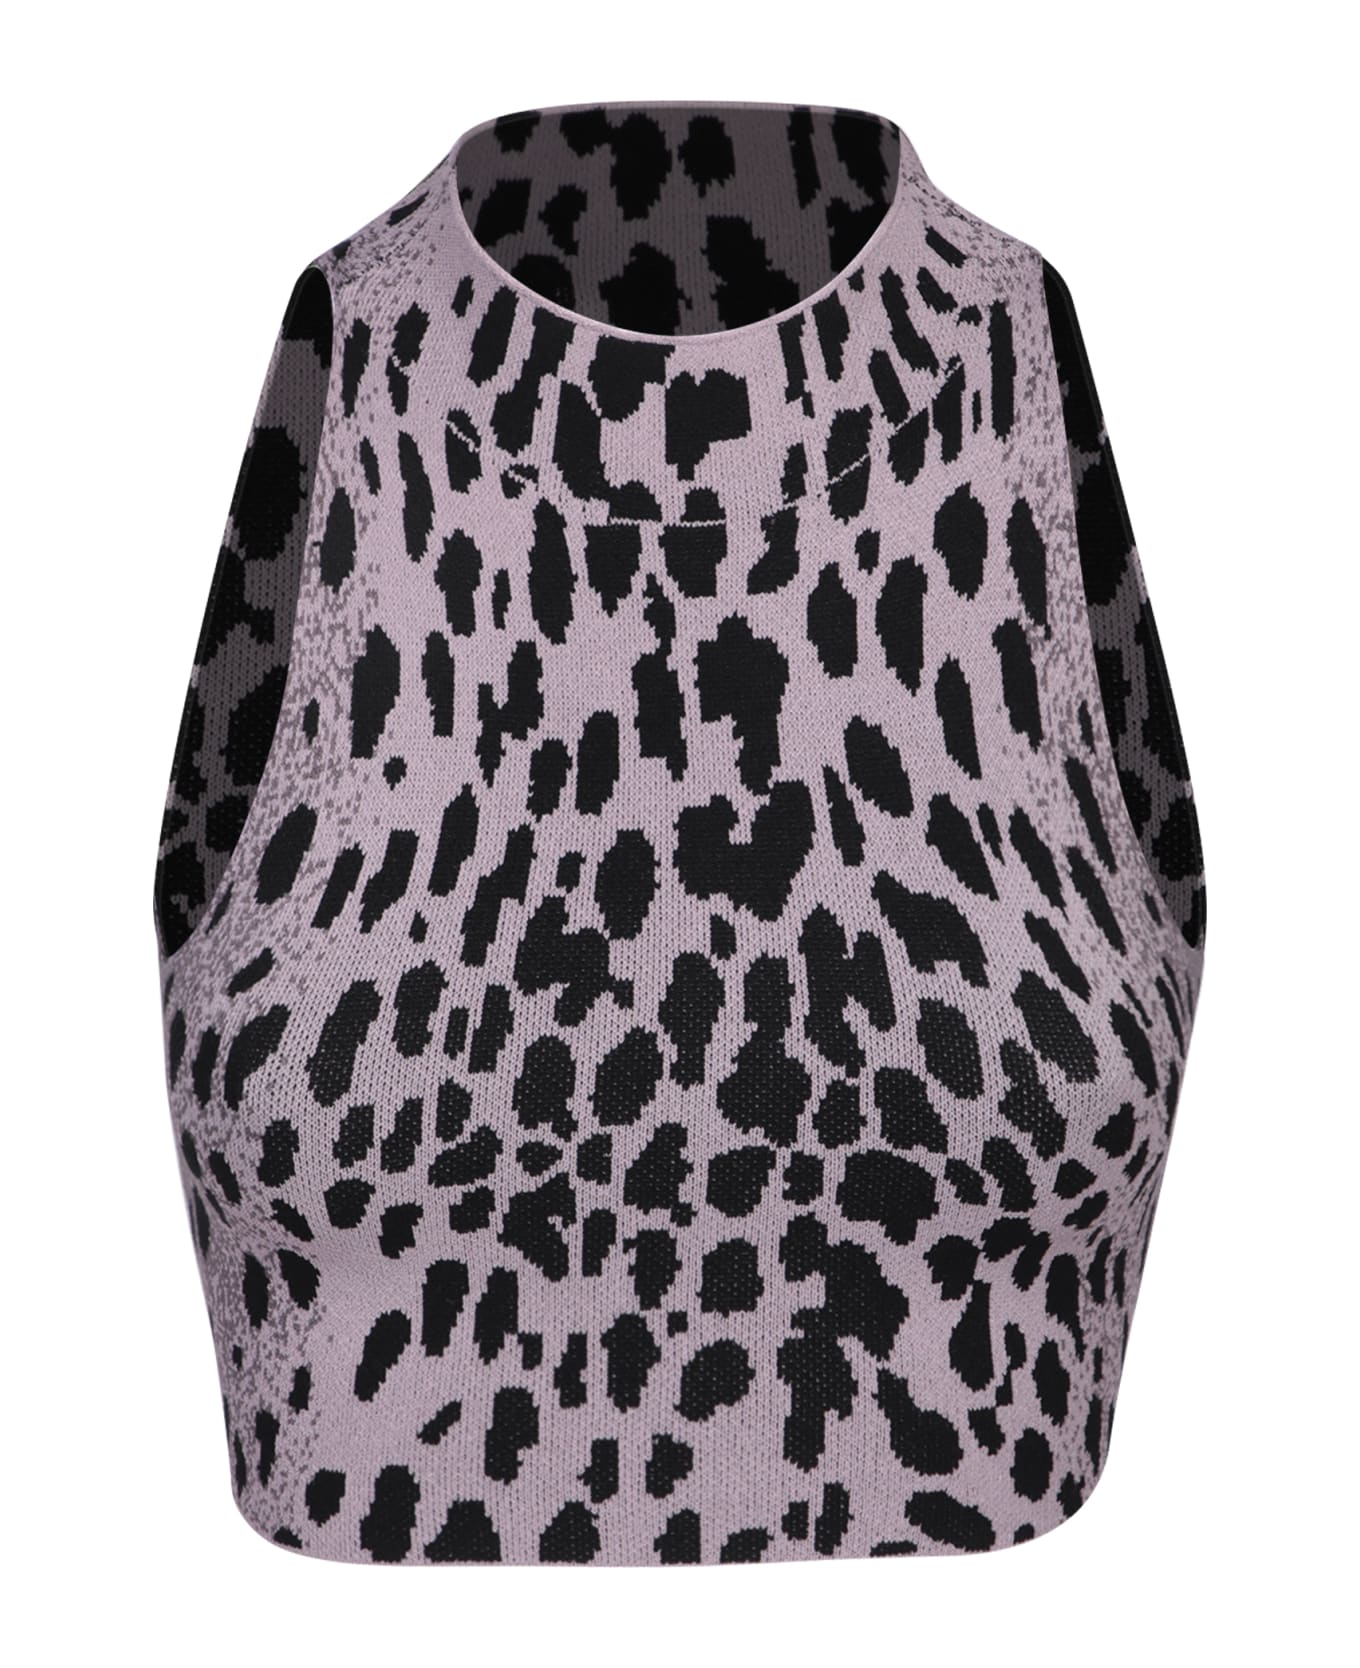 SSHEENA Leopard Knit Crop Top In Lilac And Black By Ssheena - Multi トップス